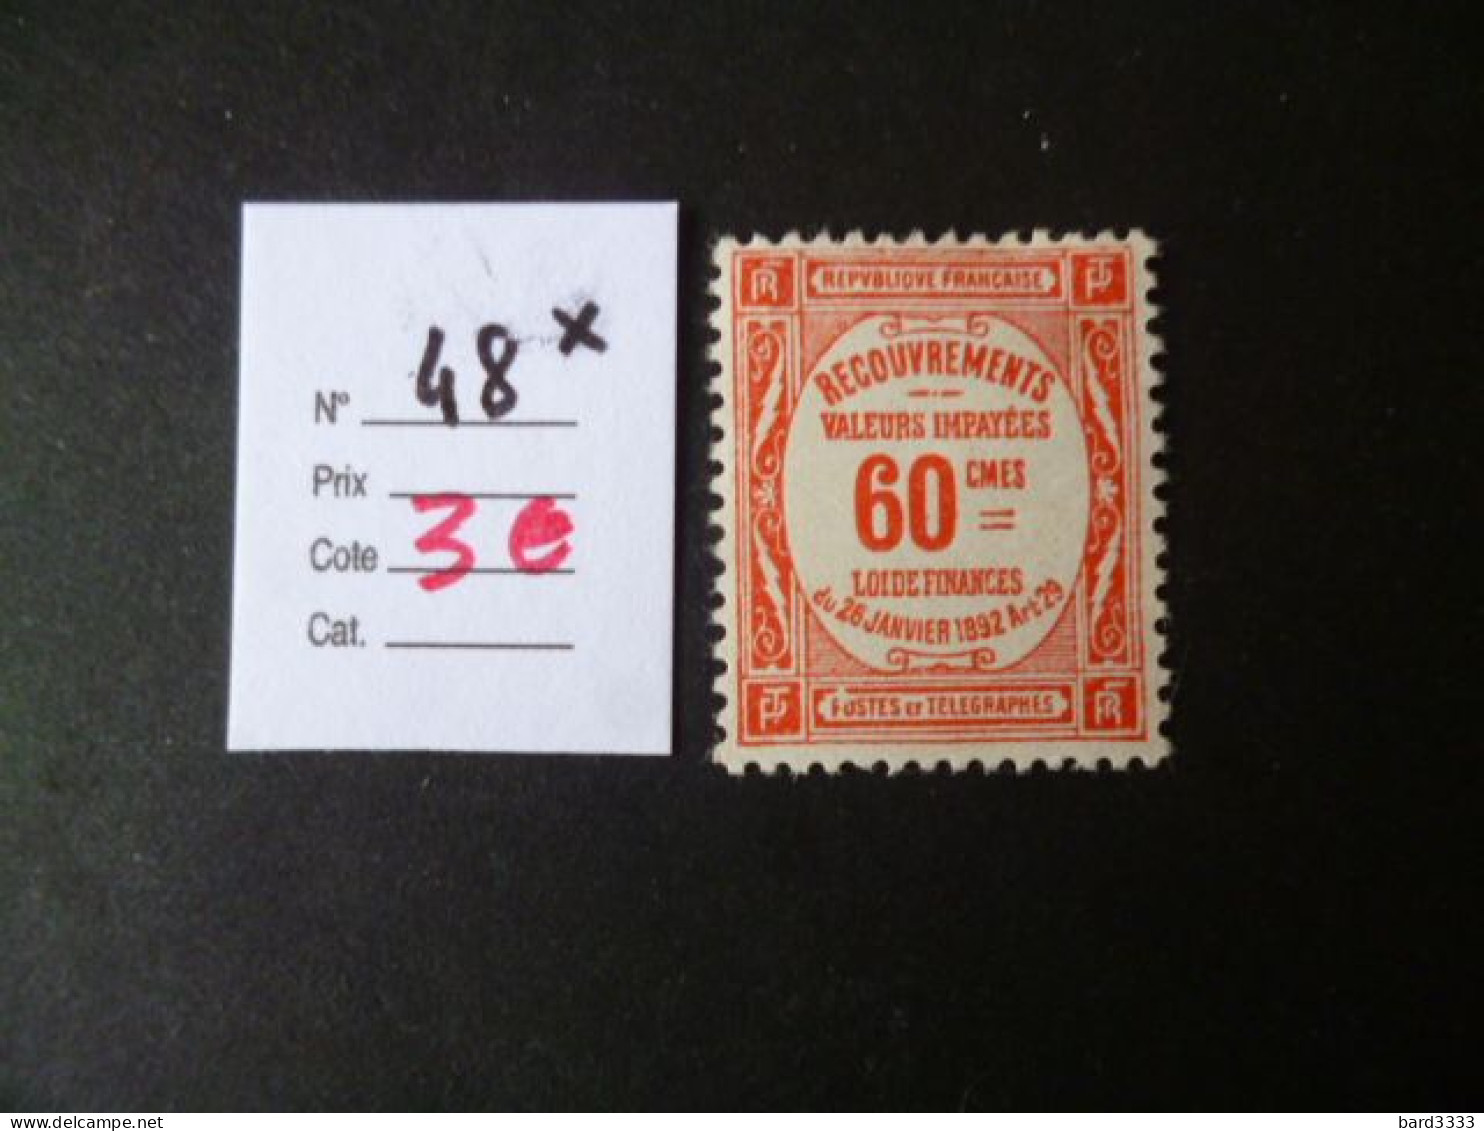 Timbre France Neuf * Taxe N° 48 Cote 3 € - 1859-1959 Nuevos